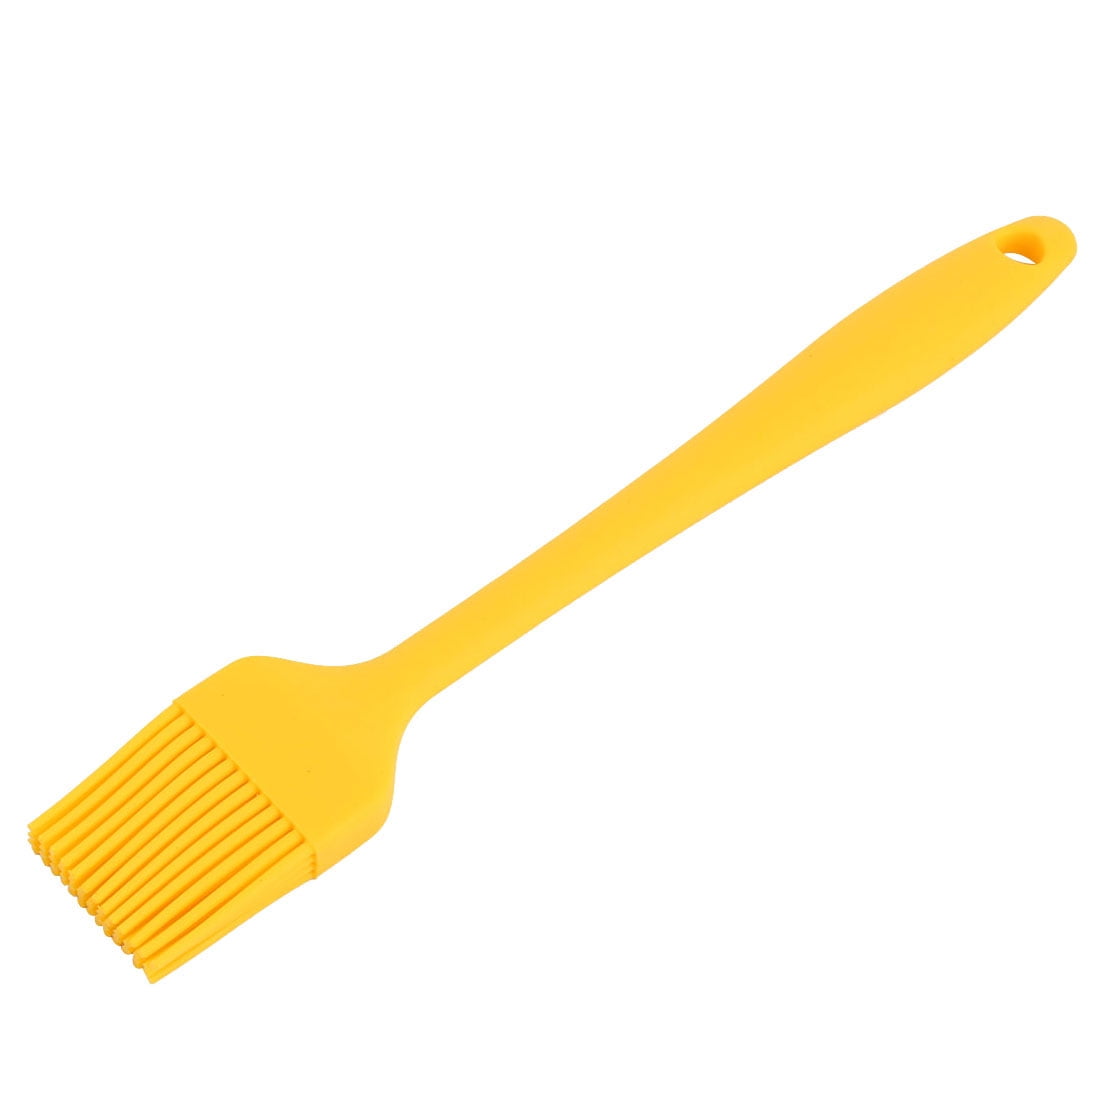 AllTopBargains Silicone Basting Brush 9 Kitchen Tool Cooking Utensil Baking Pastry Sauce New